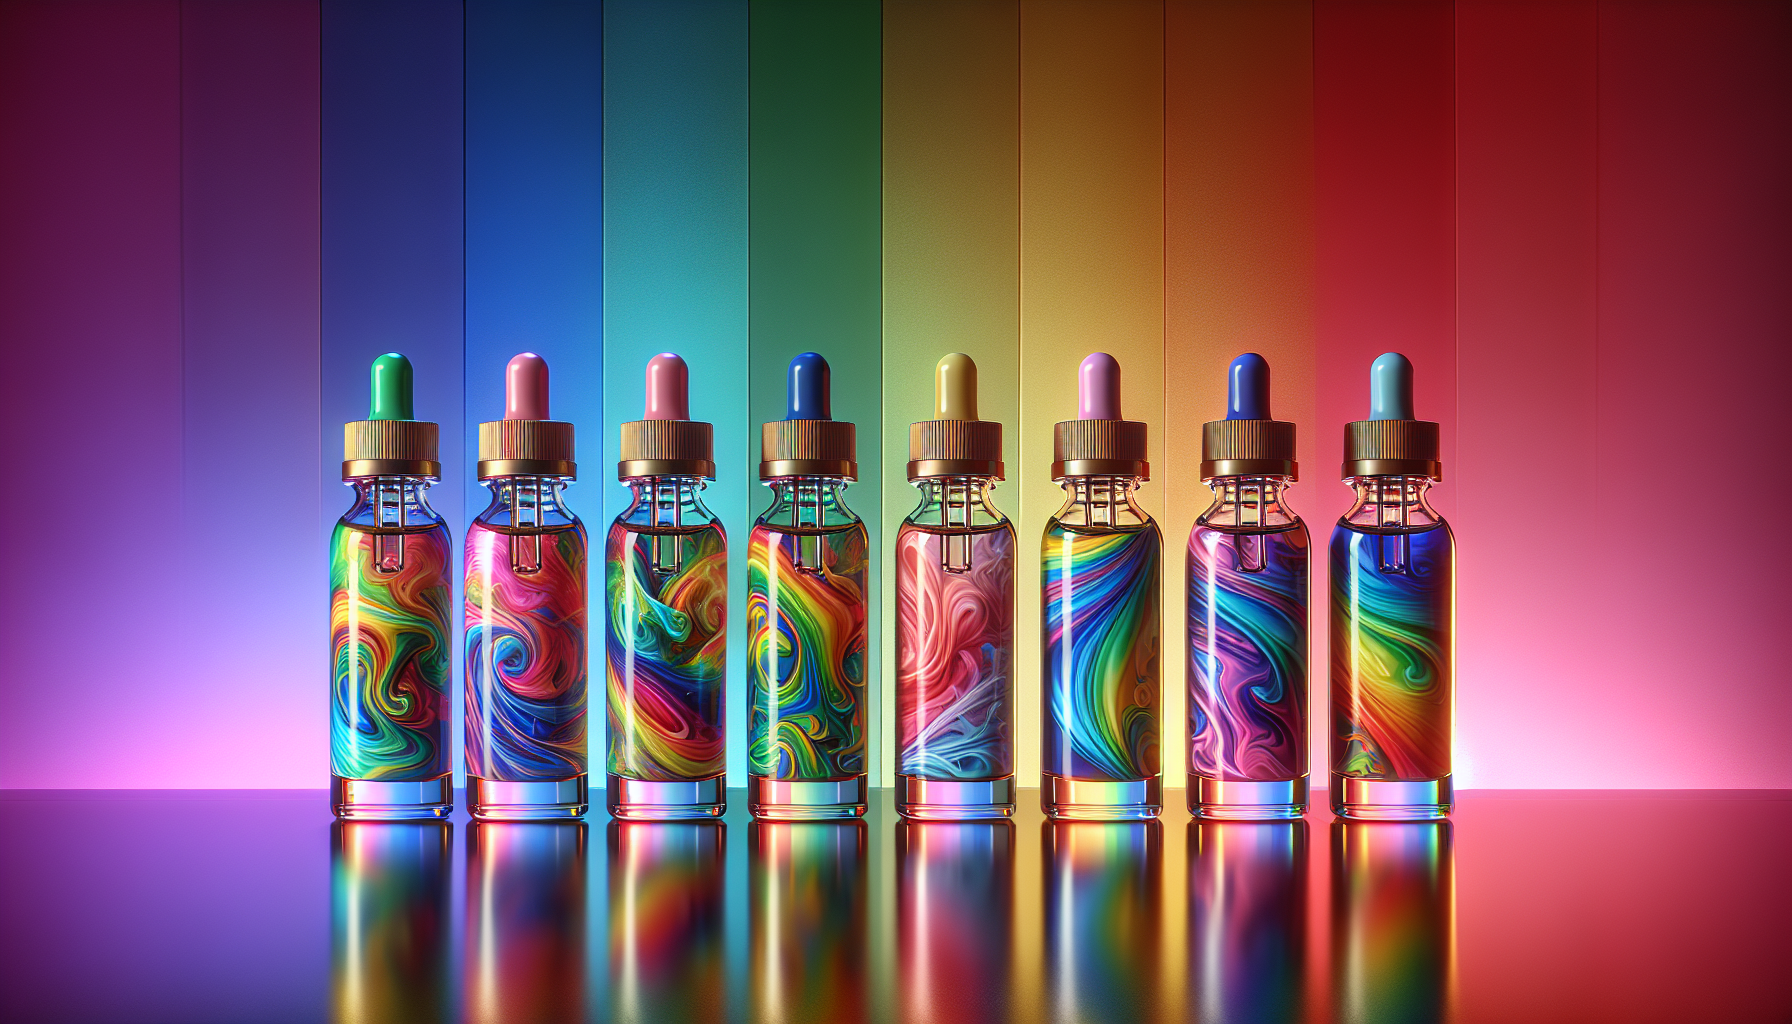 Variety of CBD vape juice flavors with natural terpenes